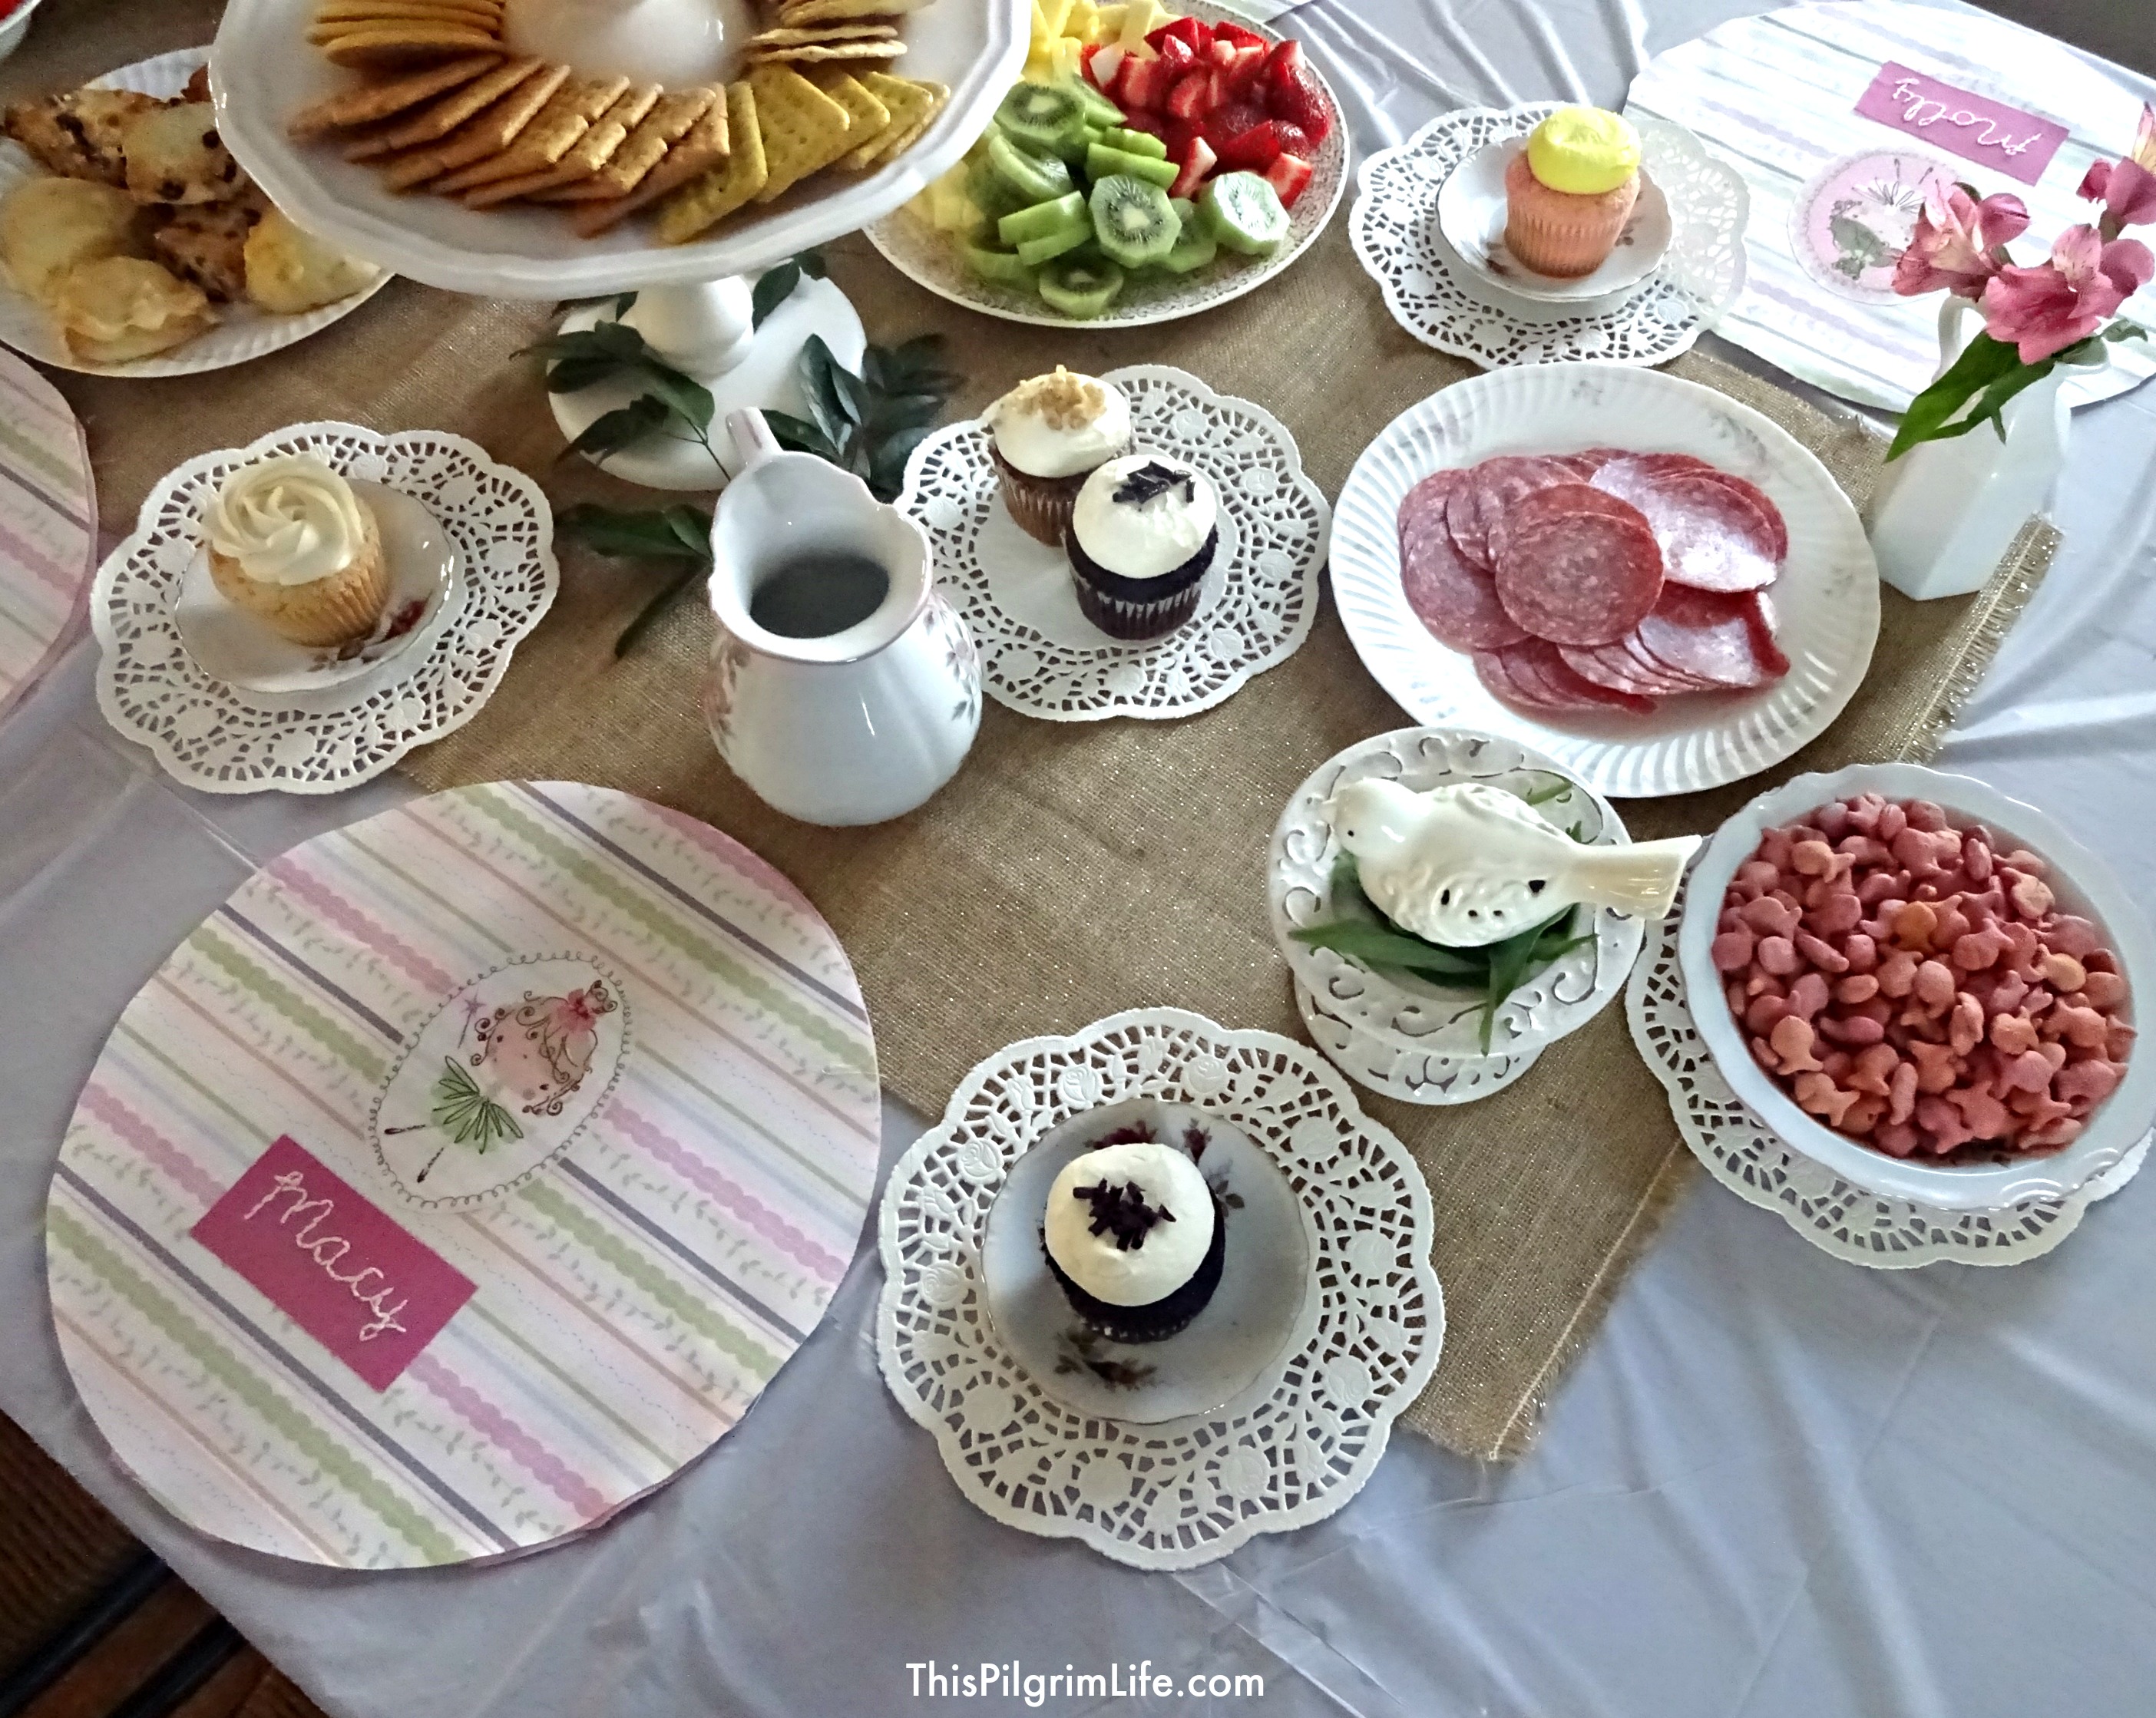 My little girl turned two this week and we celebrated with a very simple tea party. With items from the Dollar Store and Goodwill, I put together a pretty, yet inexpensive, party with a handful of her friends. 